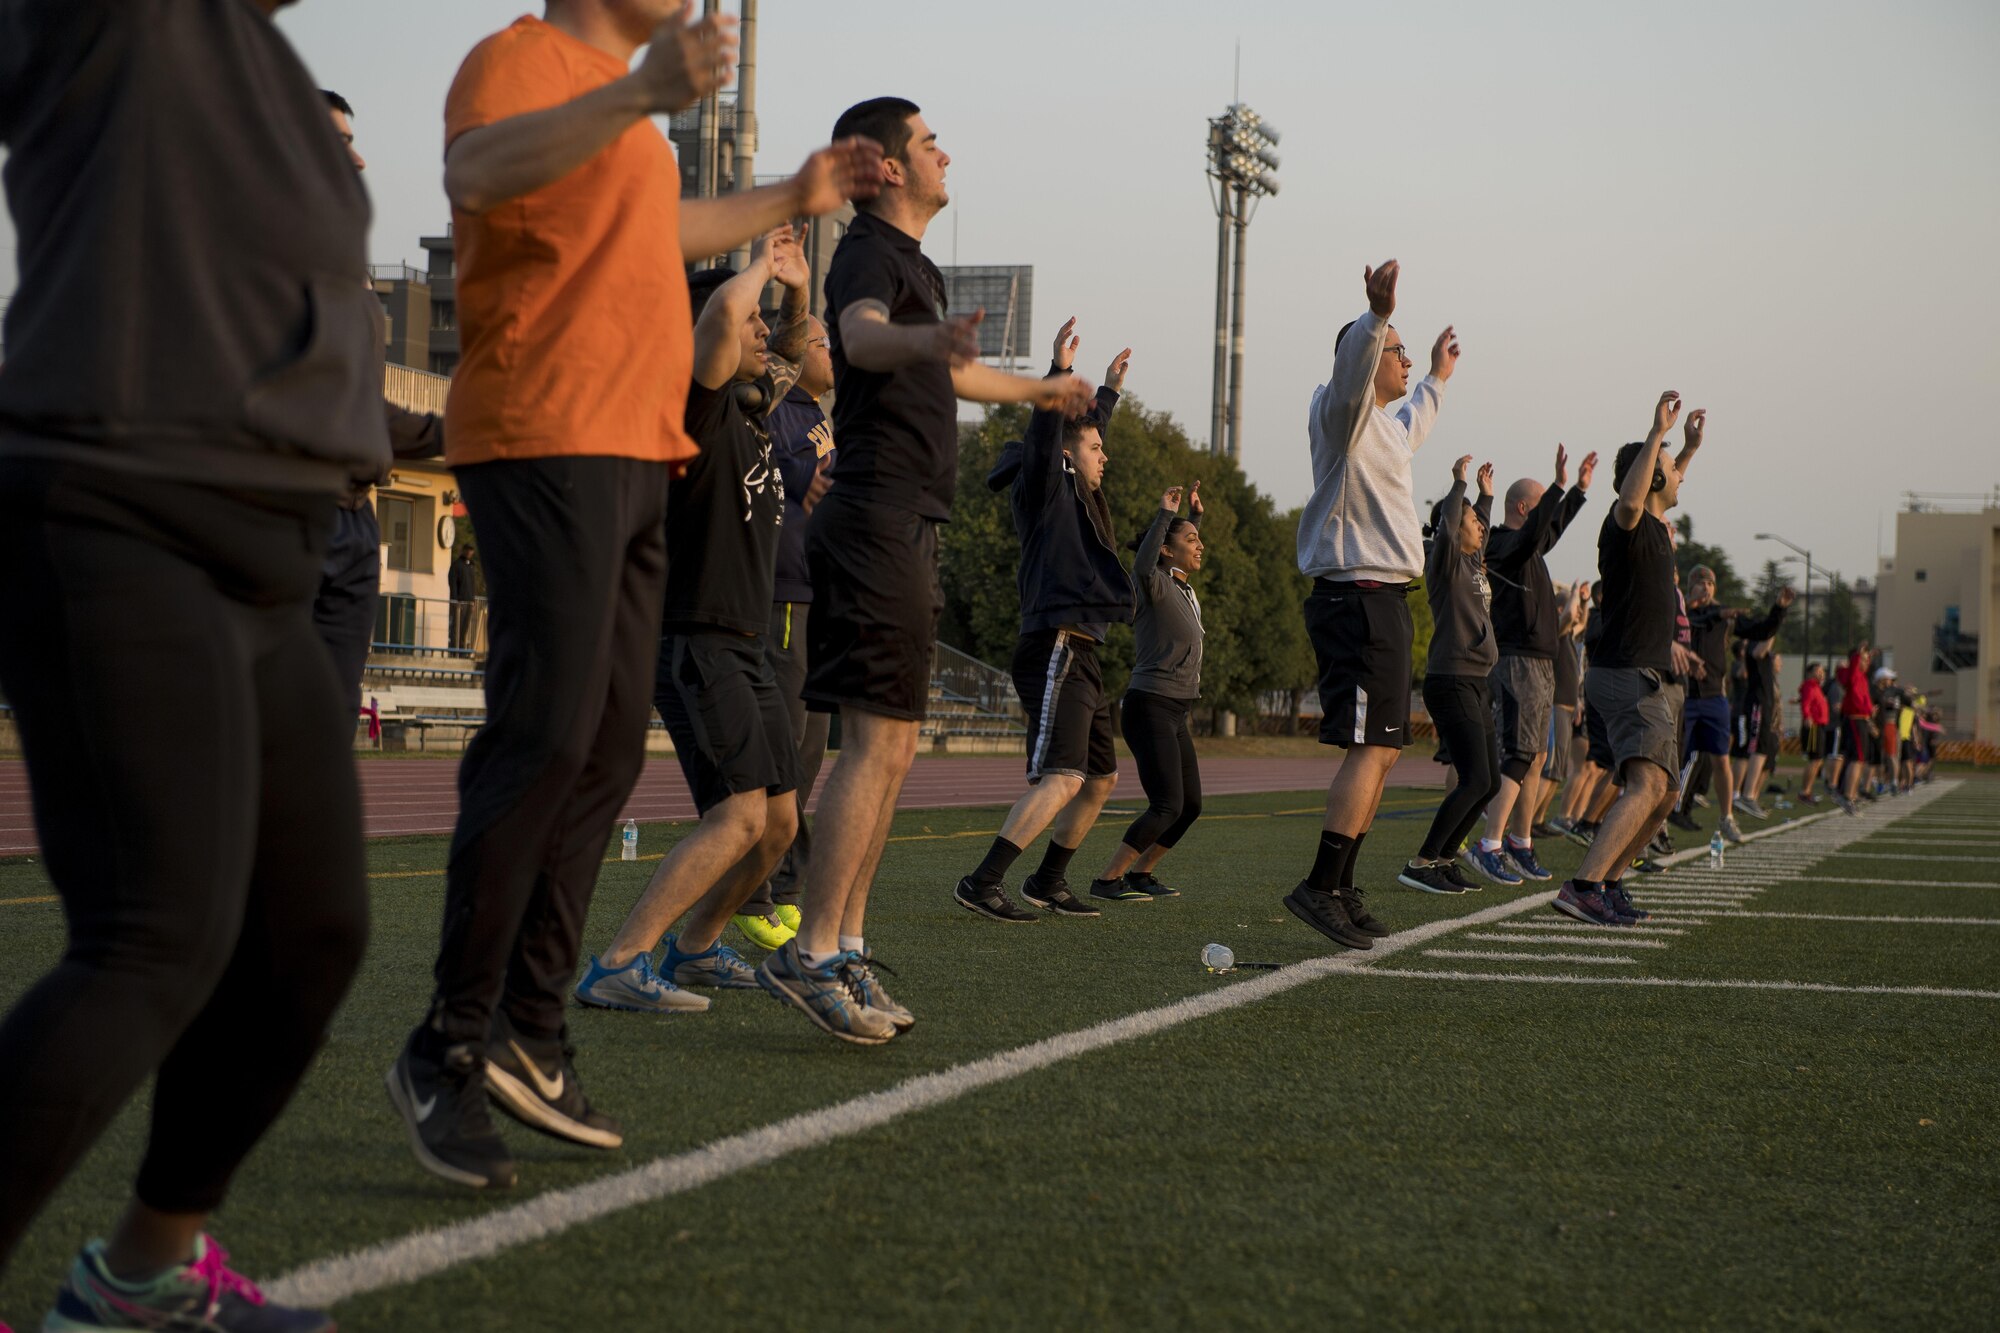 Participants in the Warrior Run fitness program perform jumping-jacks May 1, 2017, at Yokota Air Base, Japan. The Warrior Run currently has about 115 participants during the morning session and about 30 participants during the afternoon session. (U.S. Air Force photo by Airman 1st Class Donald Hudson)